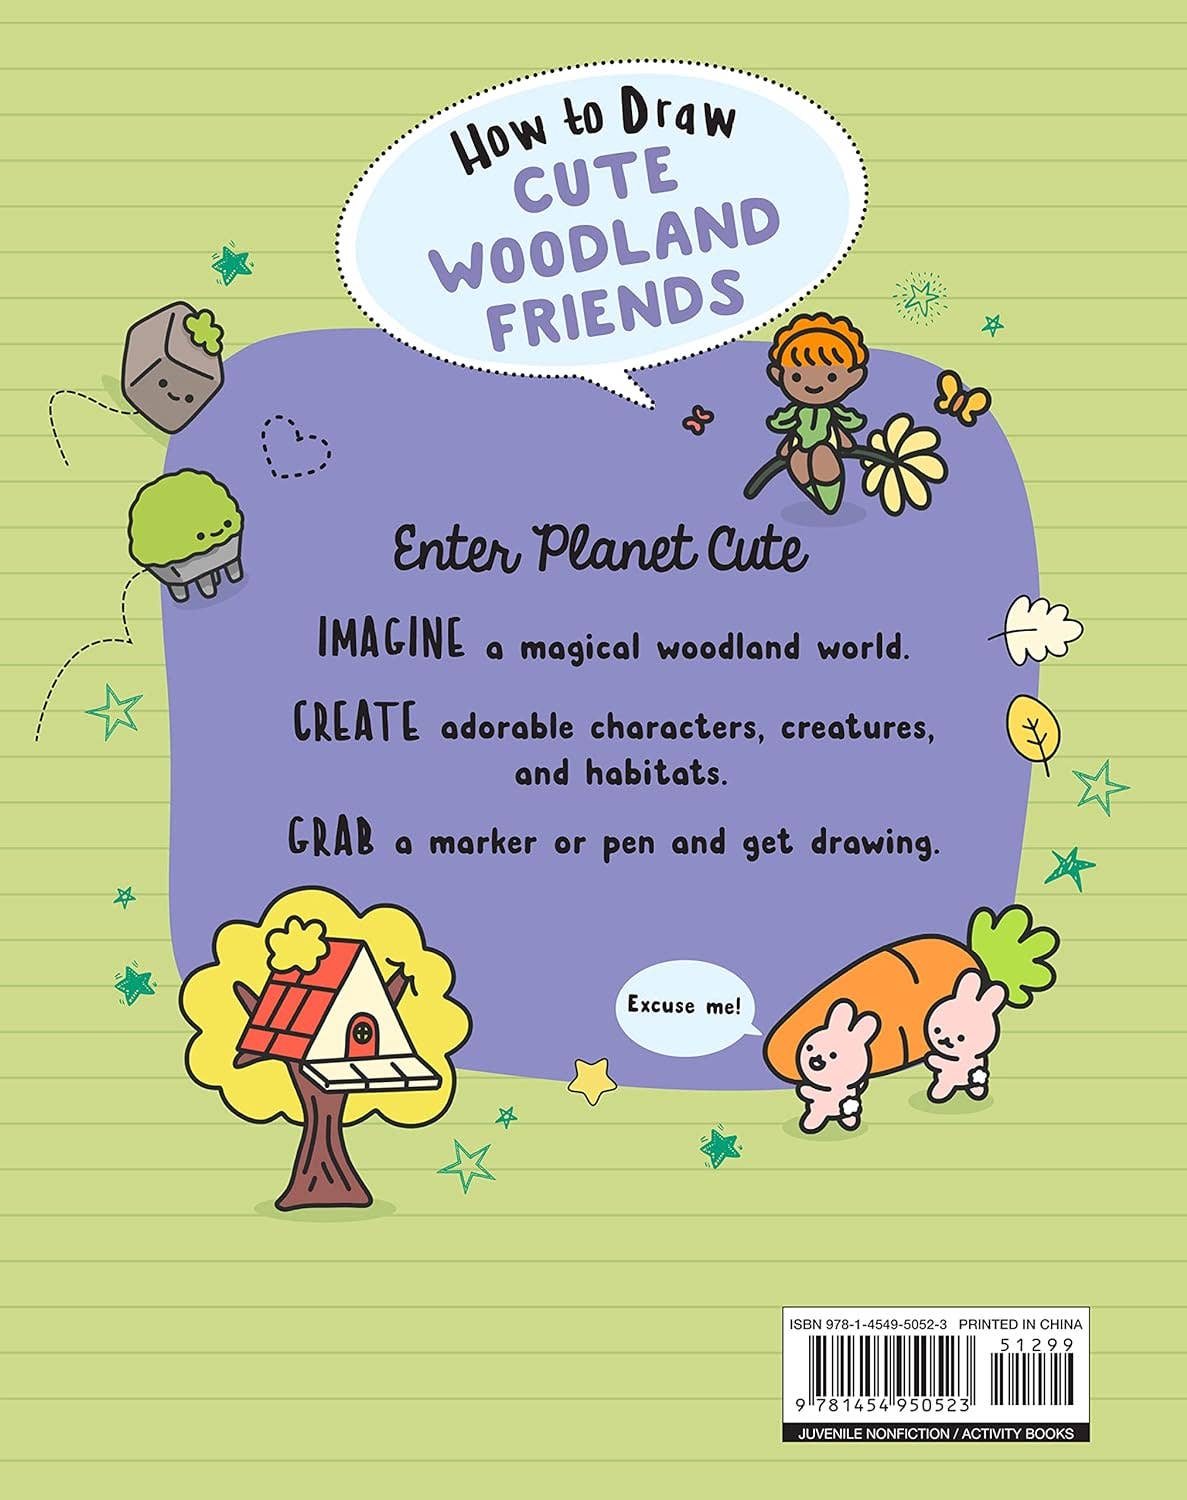 How to Draw Cute Woodland Friends by Angela Nguyen